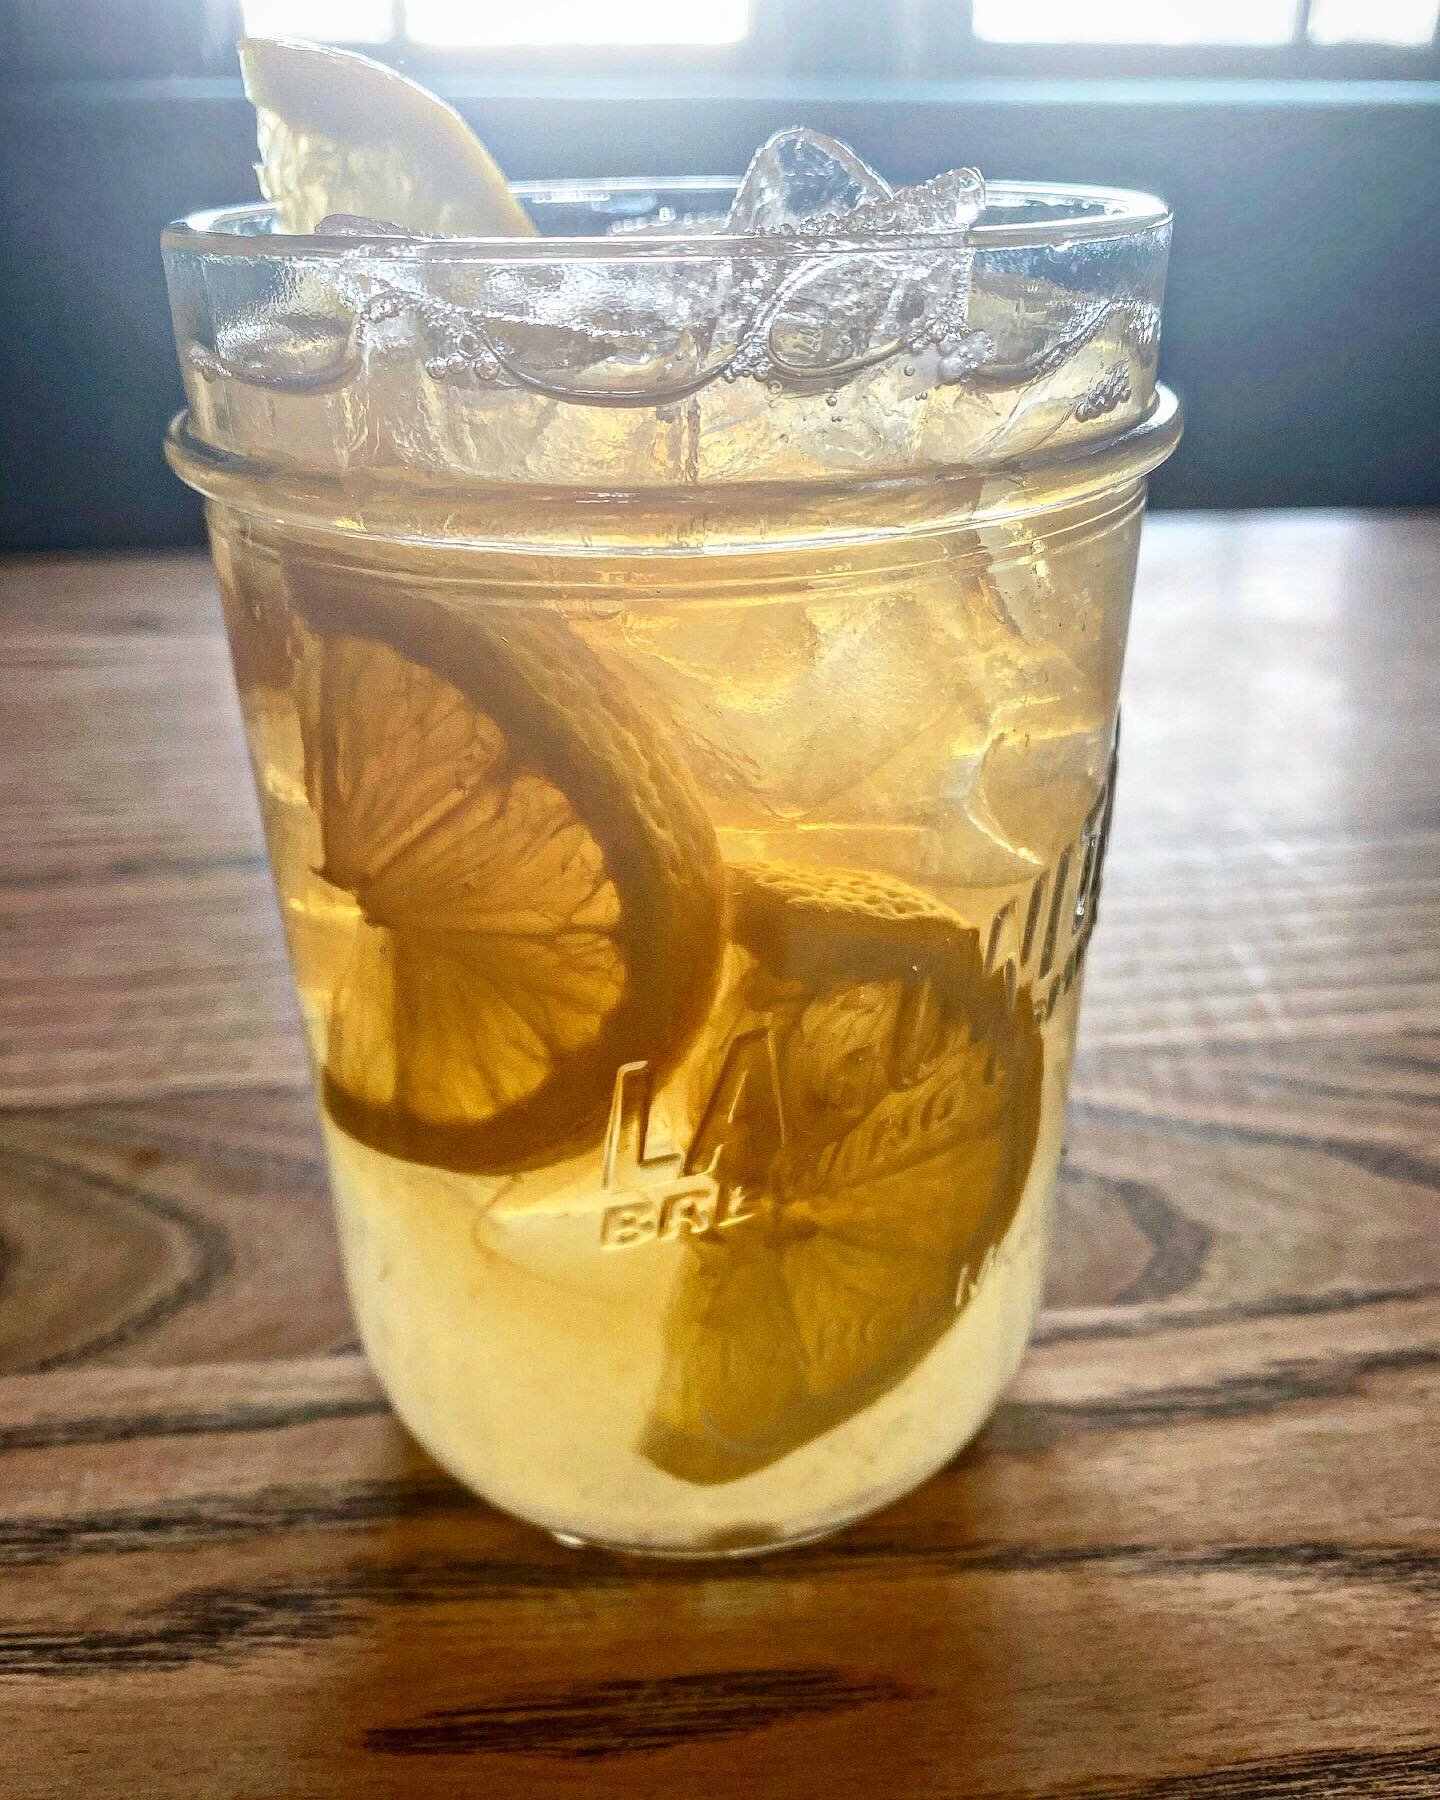 The tipsy tee is making its way back this summer ☀️ 

An Arnold Palmer spiked with some bourbon. 

On this sunny and hot day, this is sure to quench your thirst!